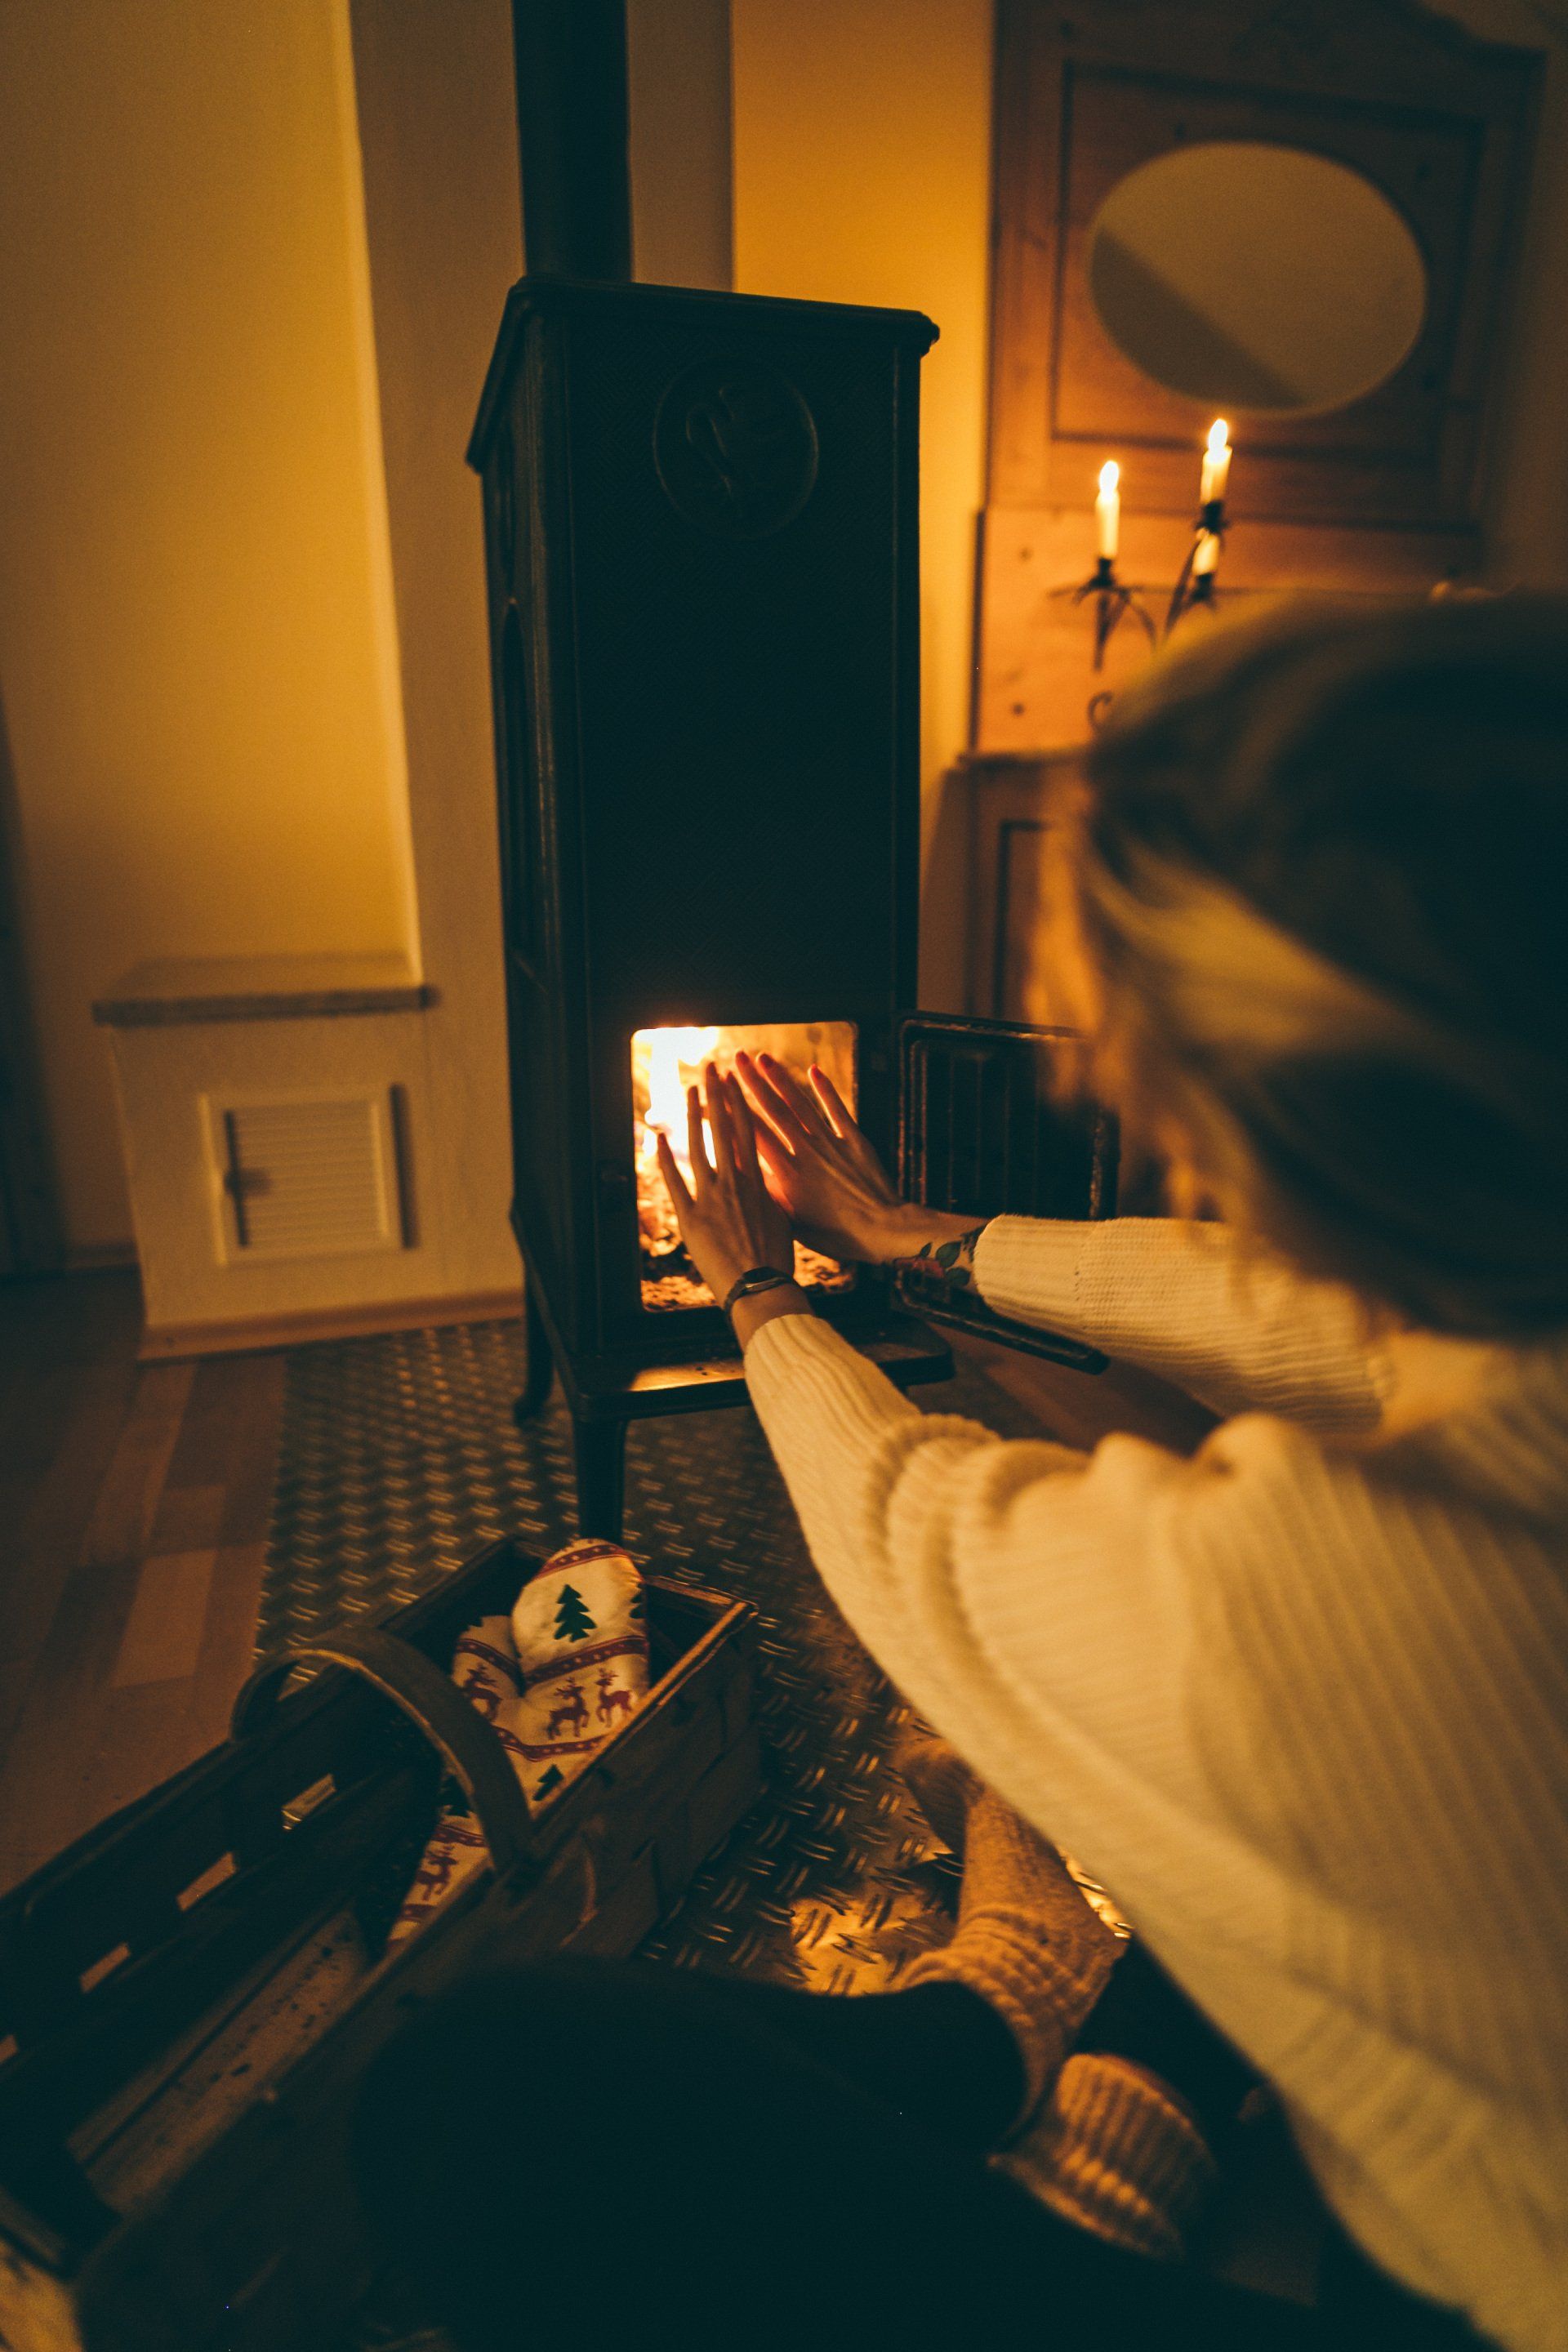 A picture of a woman warming her hands against an open fire